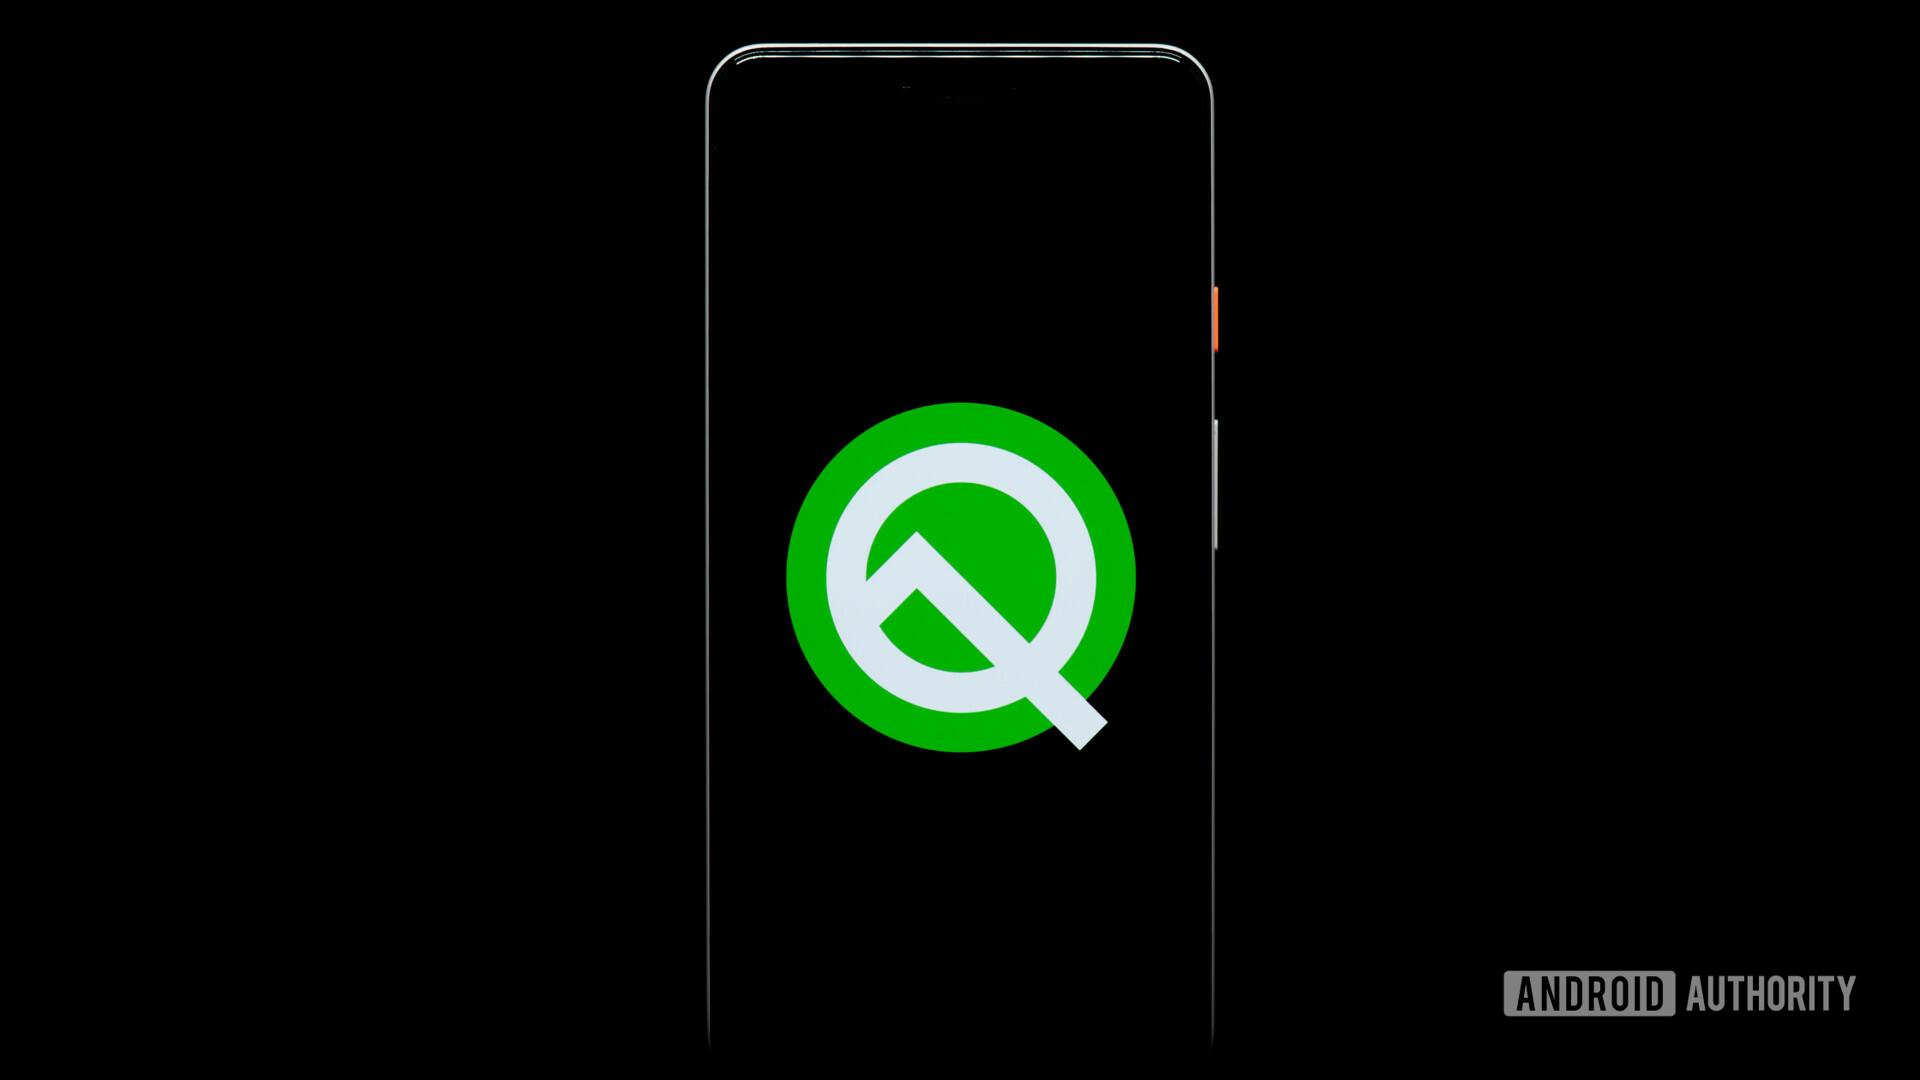 Android Q logo on a smartphone.